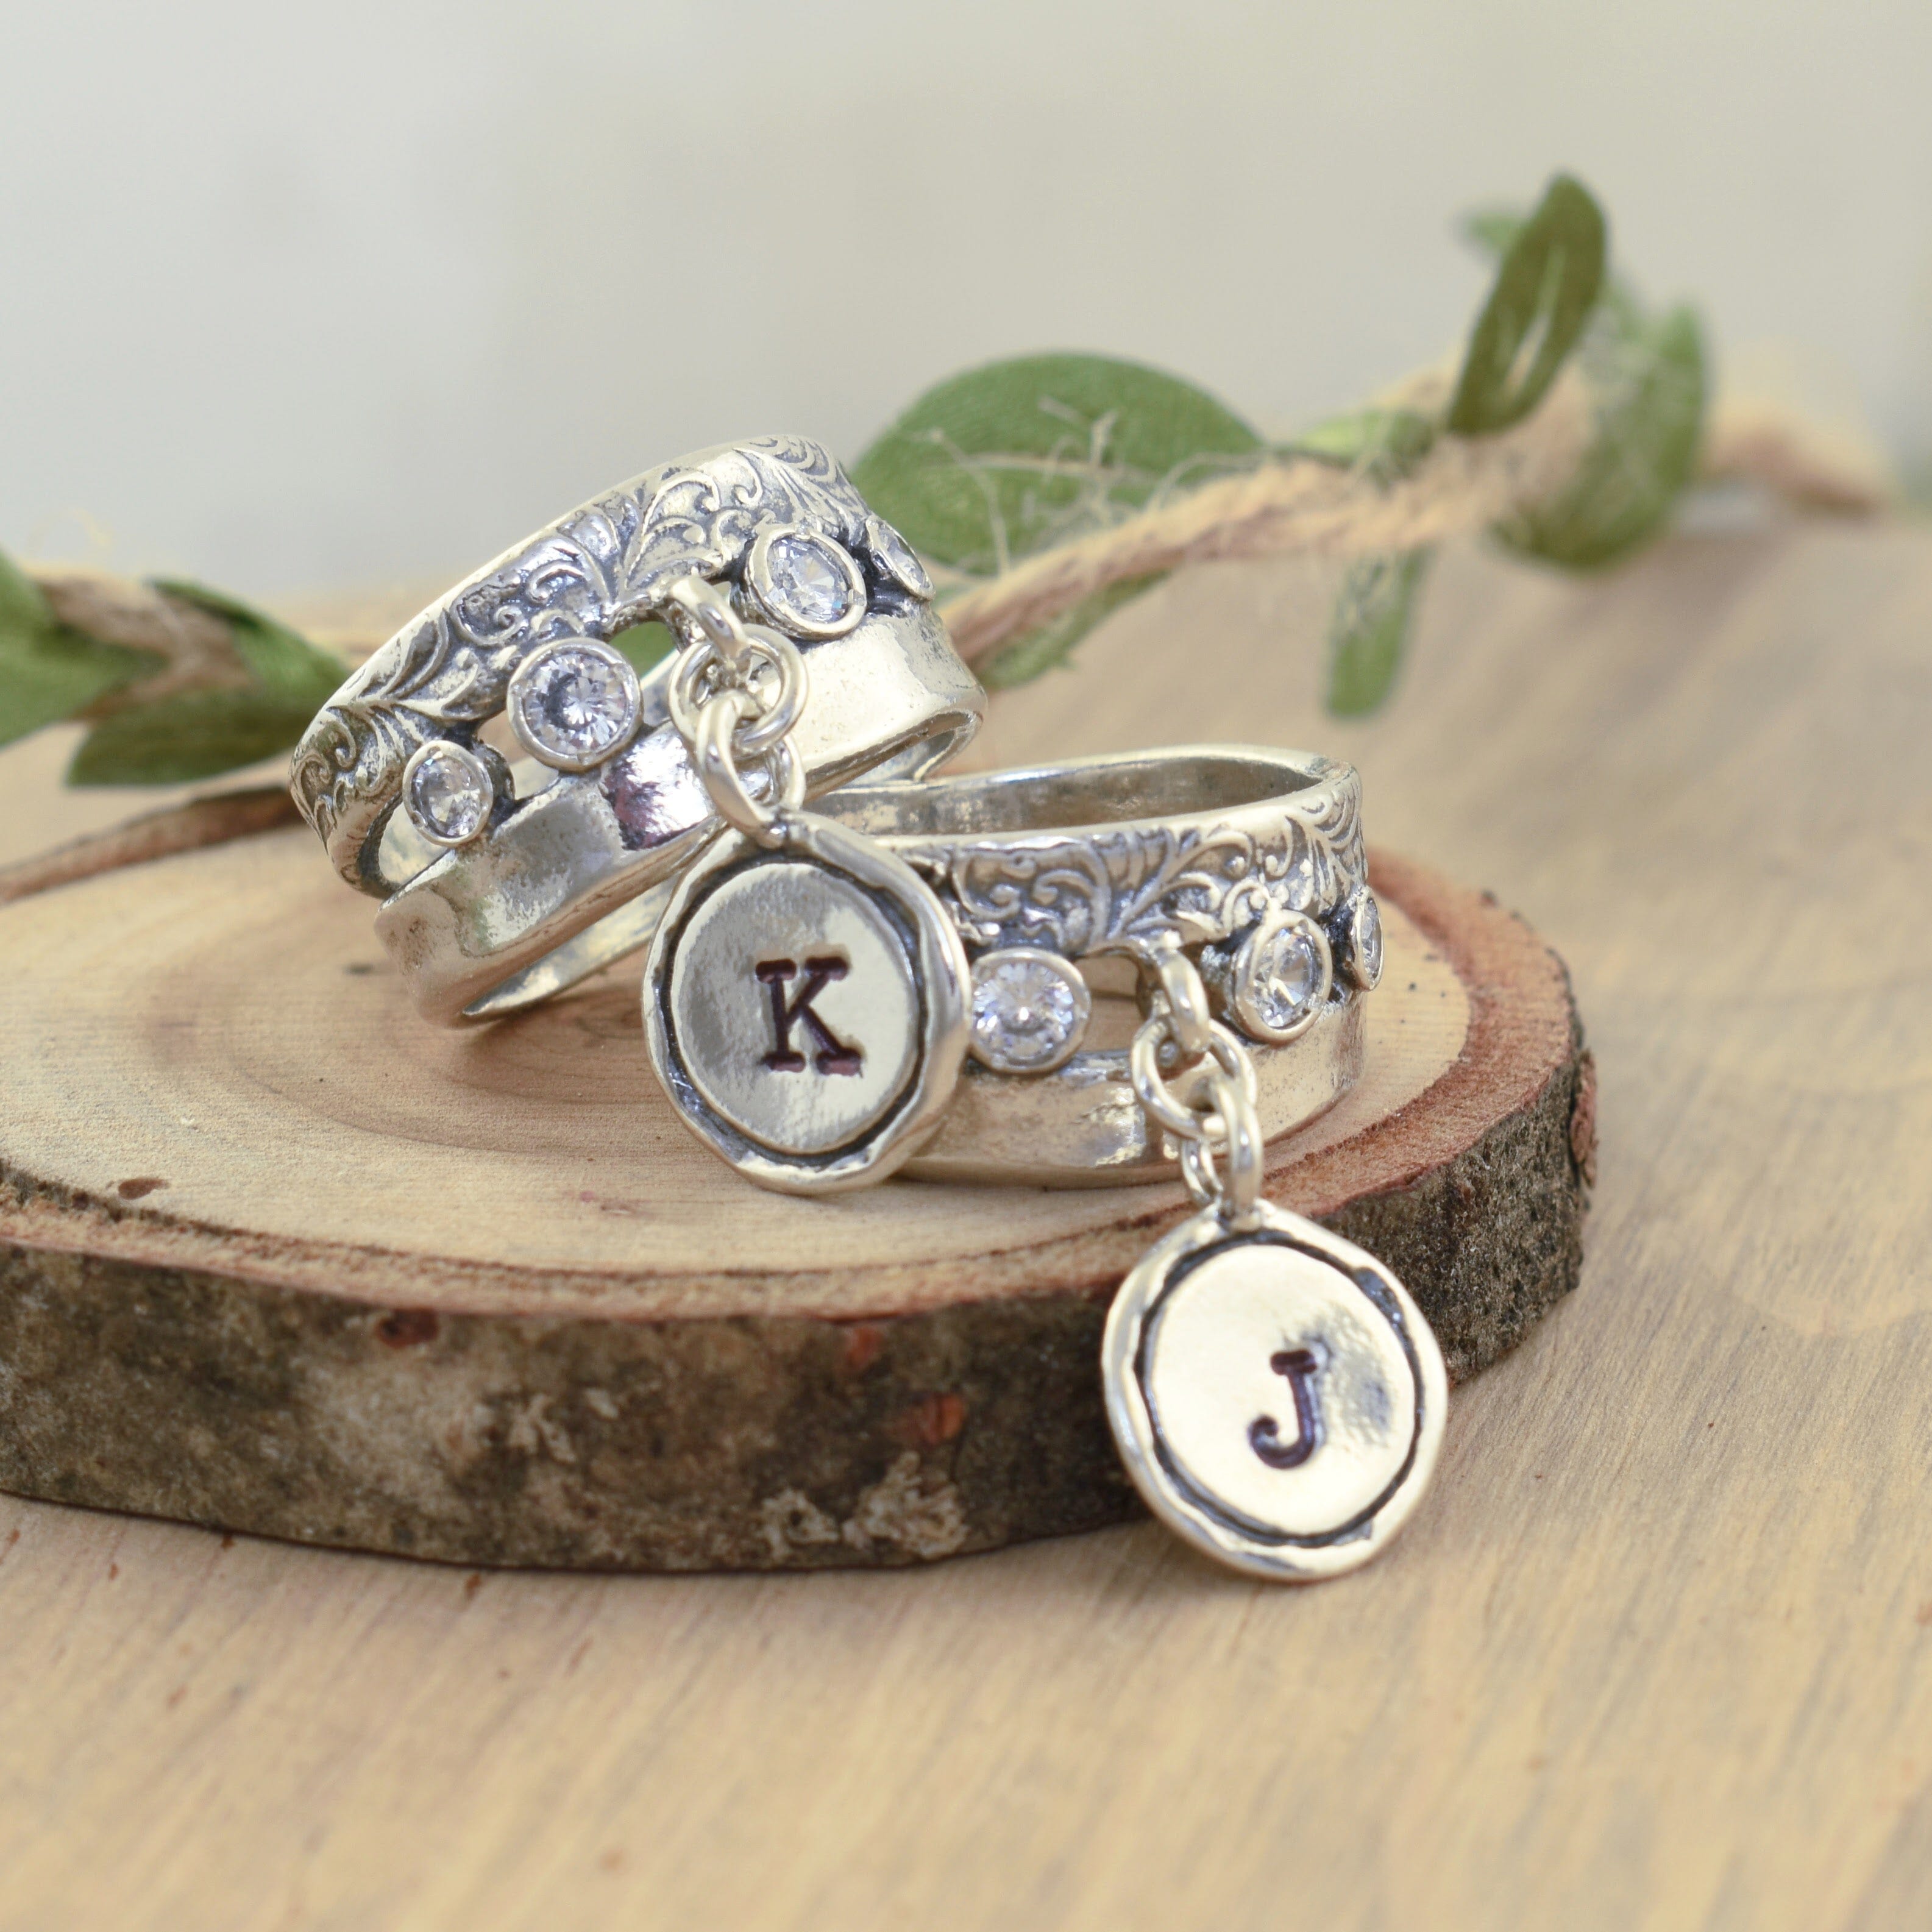 Hand-stamped initial dangle ring in .925 sterling silver